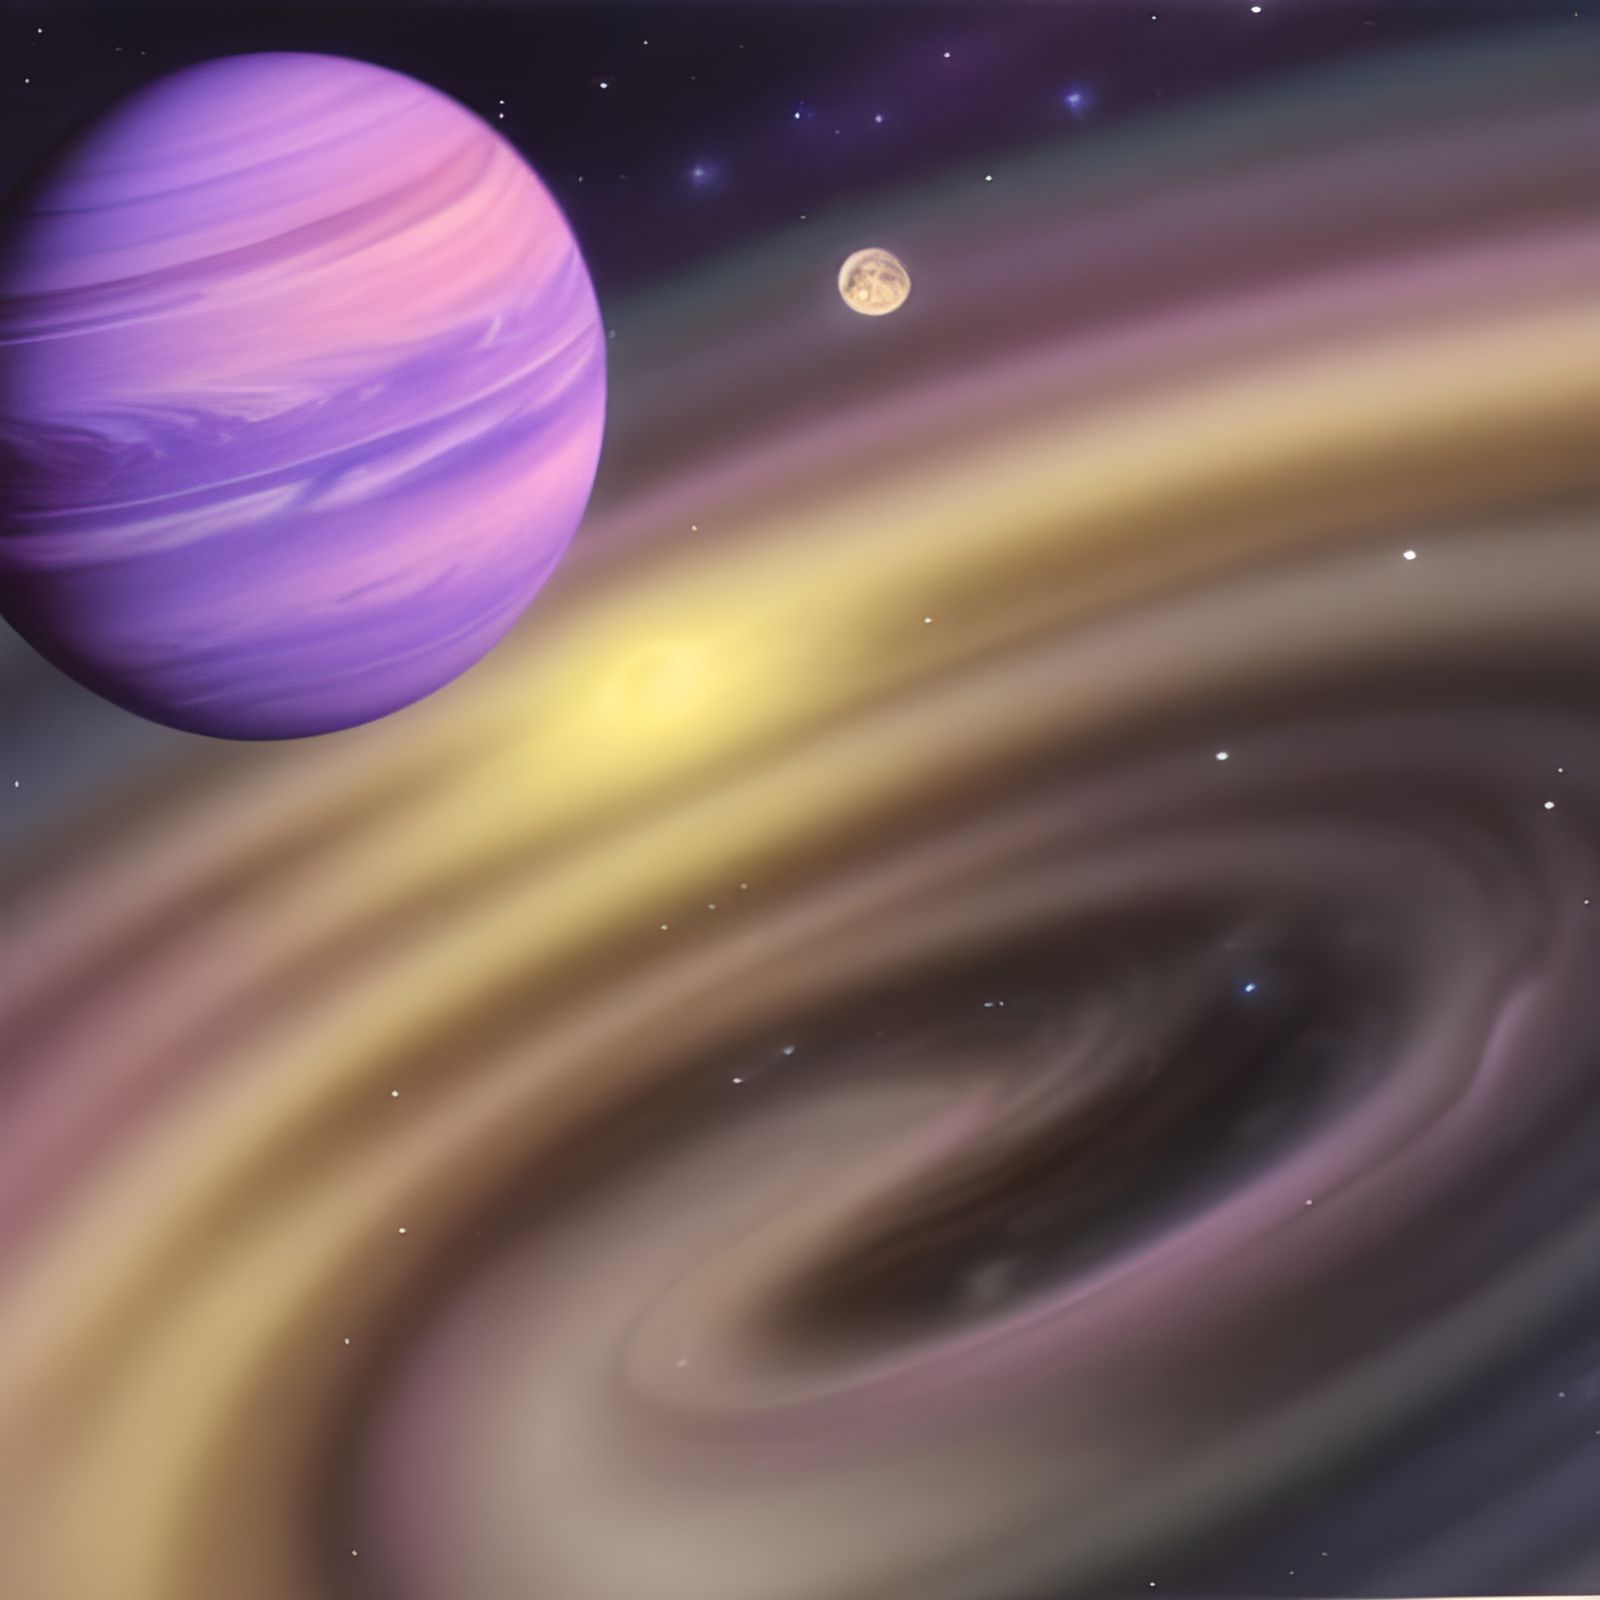 space planet purple gas giant striped dark bands swirling moons hyperreal fantasy Thomas Kinkade